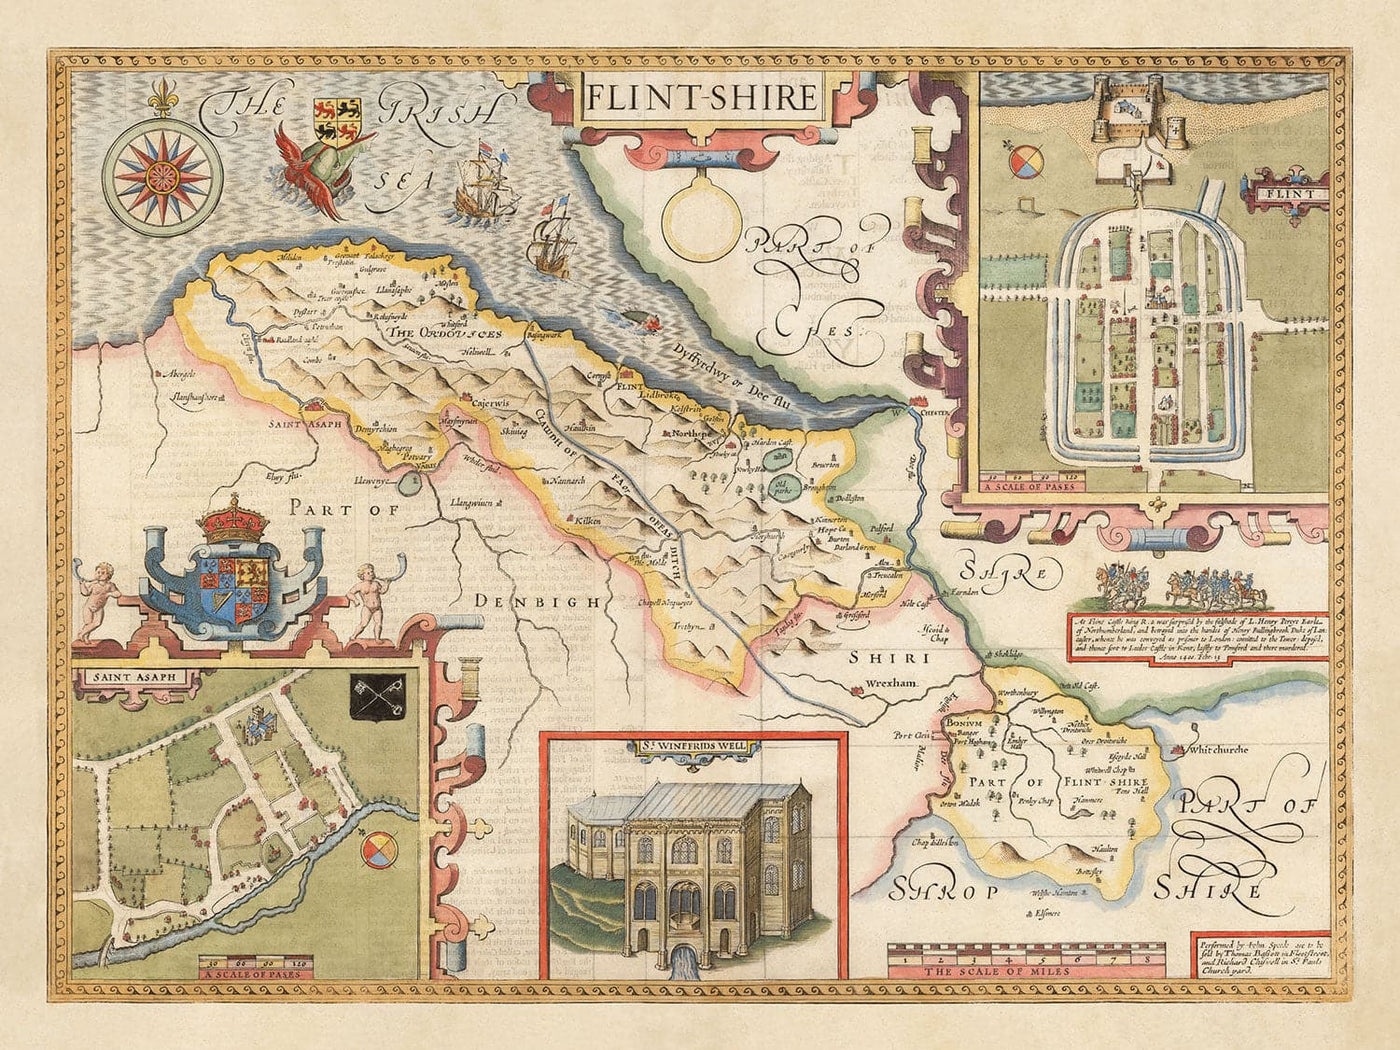 Old Map of Flintshire Wales, 1611 by John Speed - Flint, Mold, Chester, Wrexham